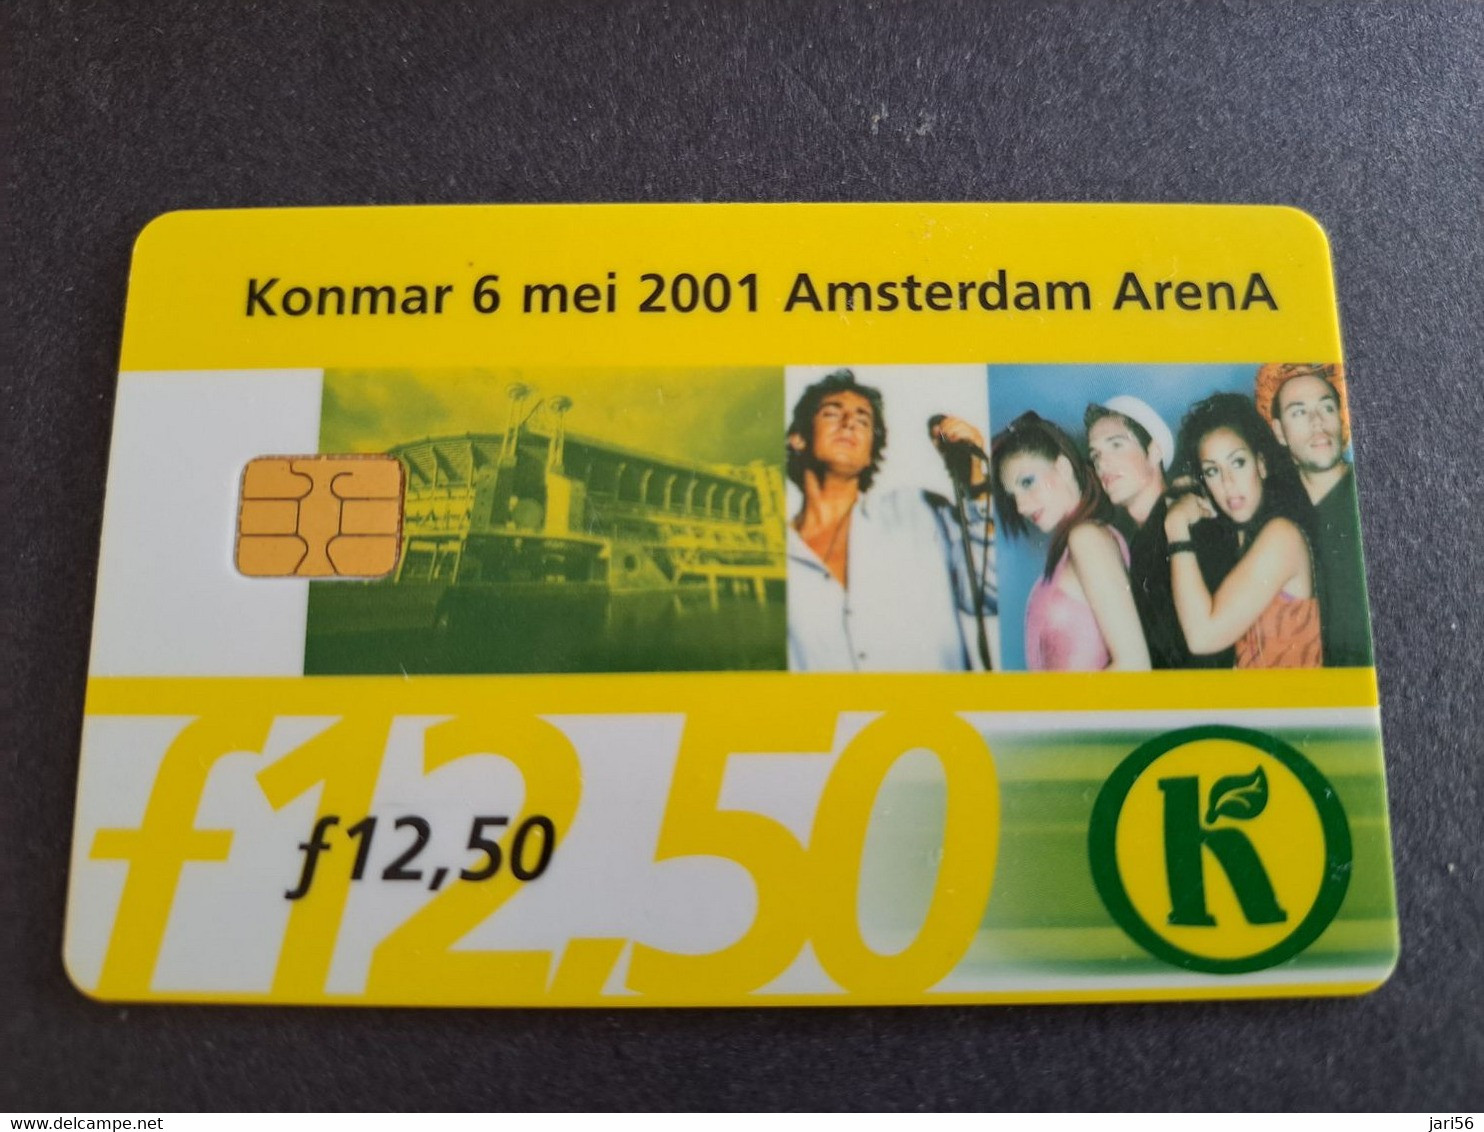 NETHERLANDS CHIPCARD HFL 12,50 ,- ARENA CARD / KONMAR     /MUSIC   - USED CARD  ** 10364** - Public